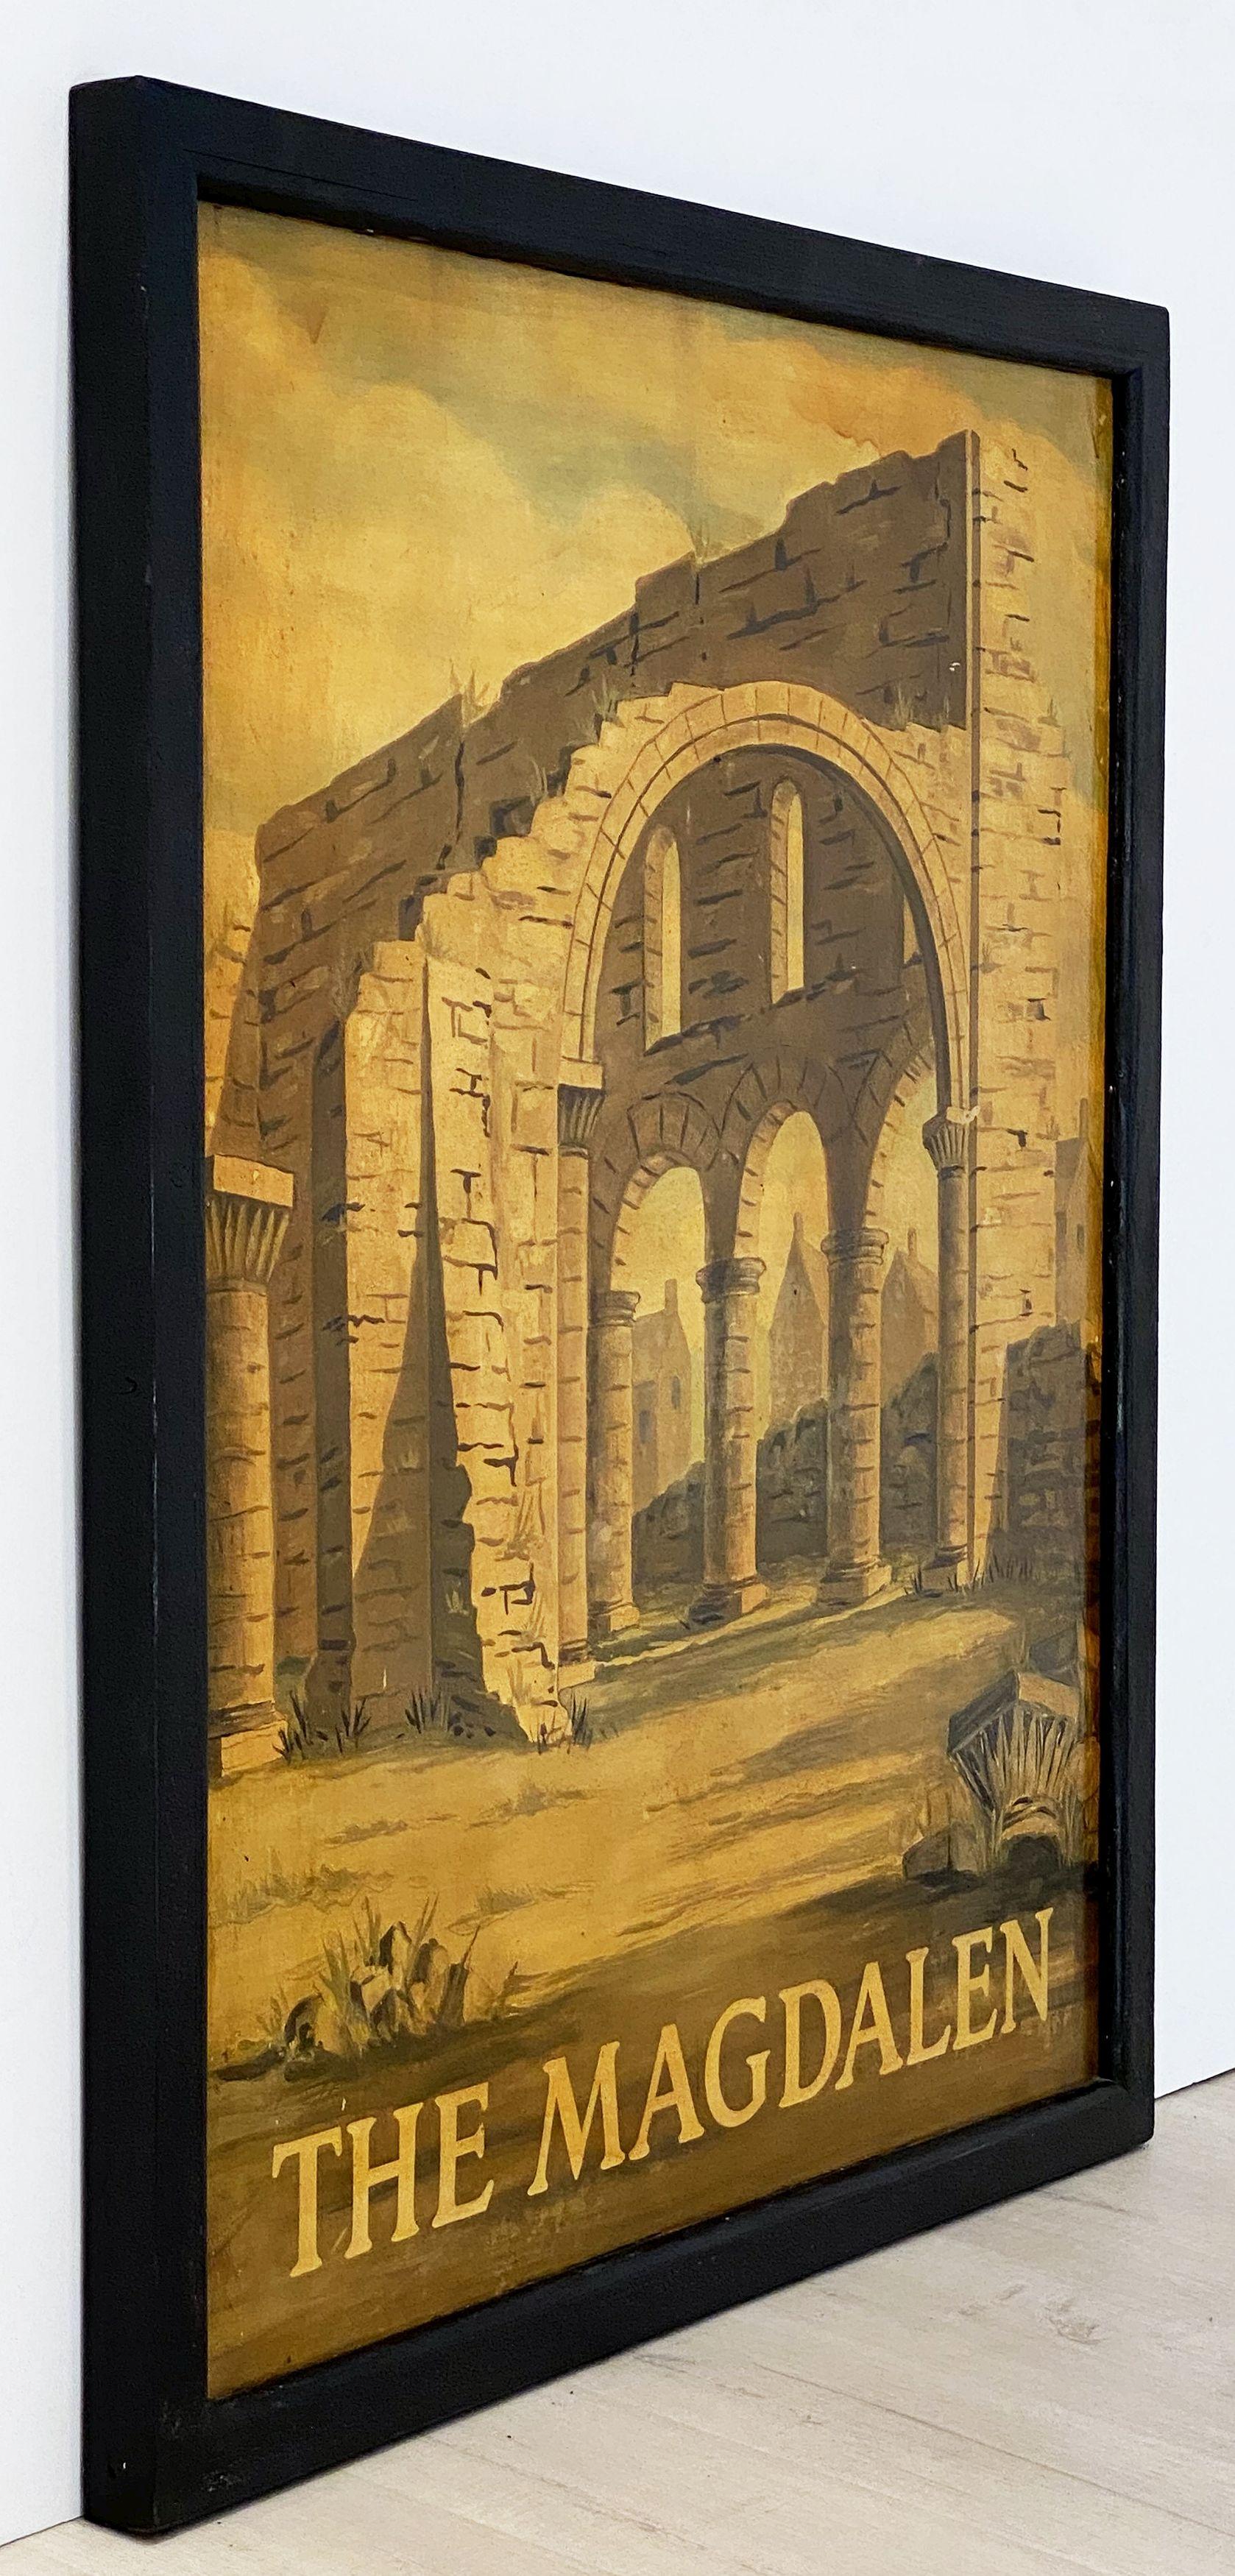 An authentic English pub sign (one-sided) featuring a painting of a monastery abbey ruin, entitled: The Magdalen.
 
A very fine example of vintage advertising artwork and ready for display.